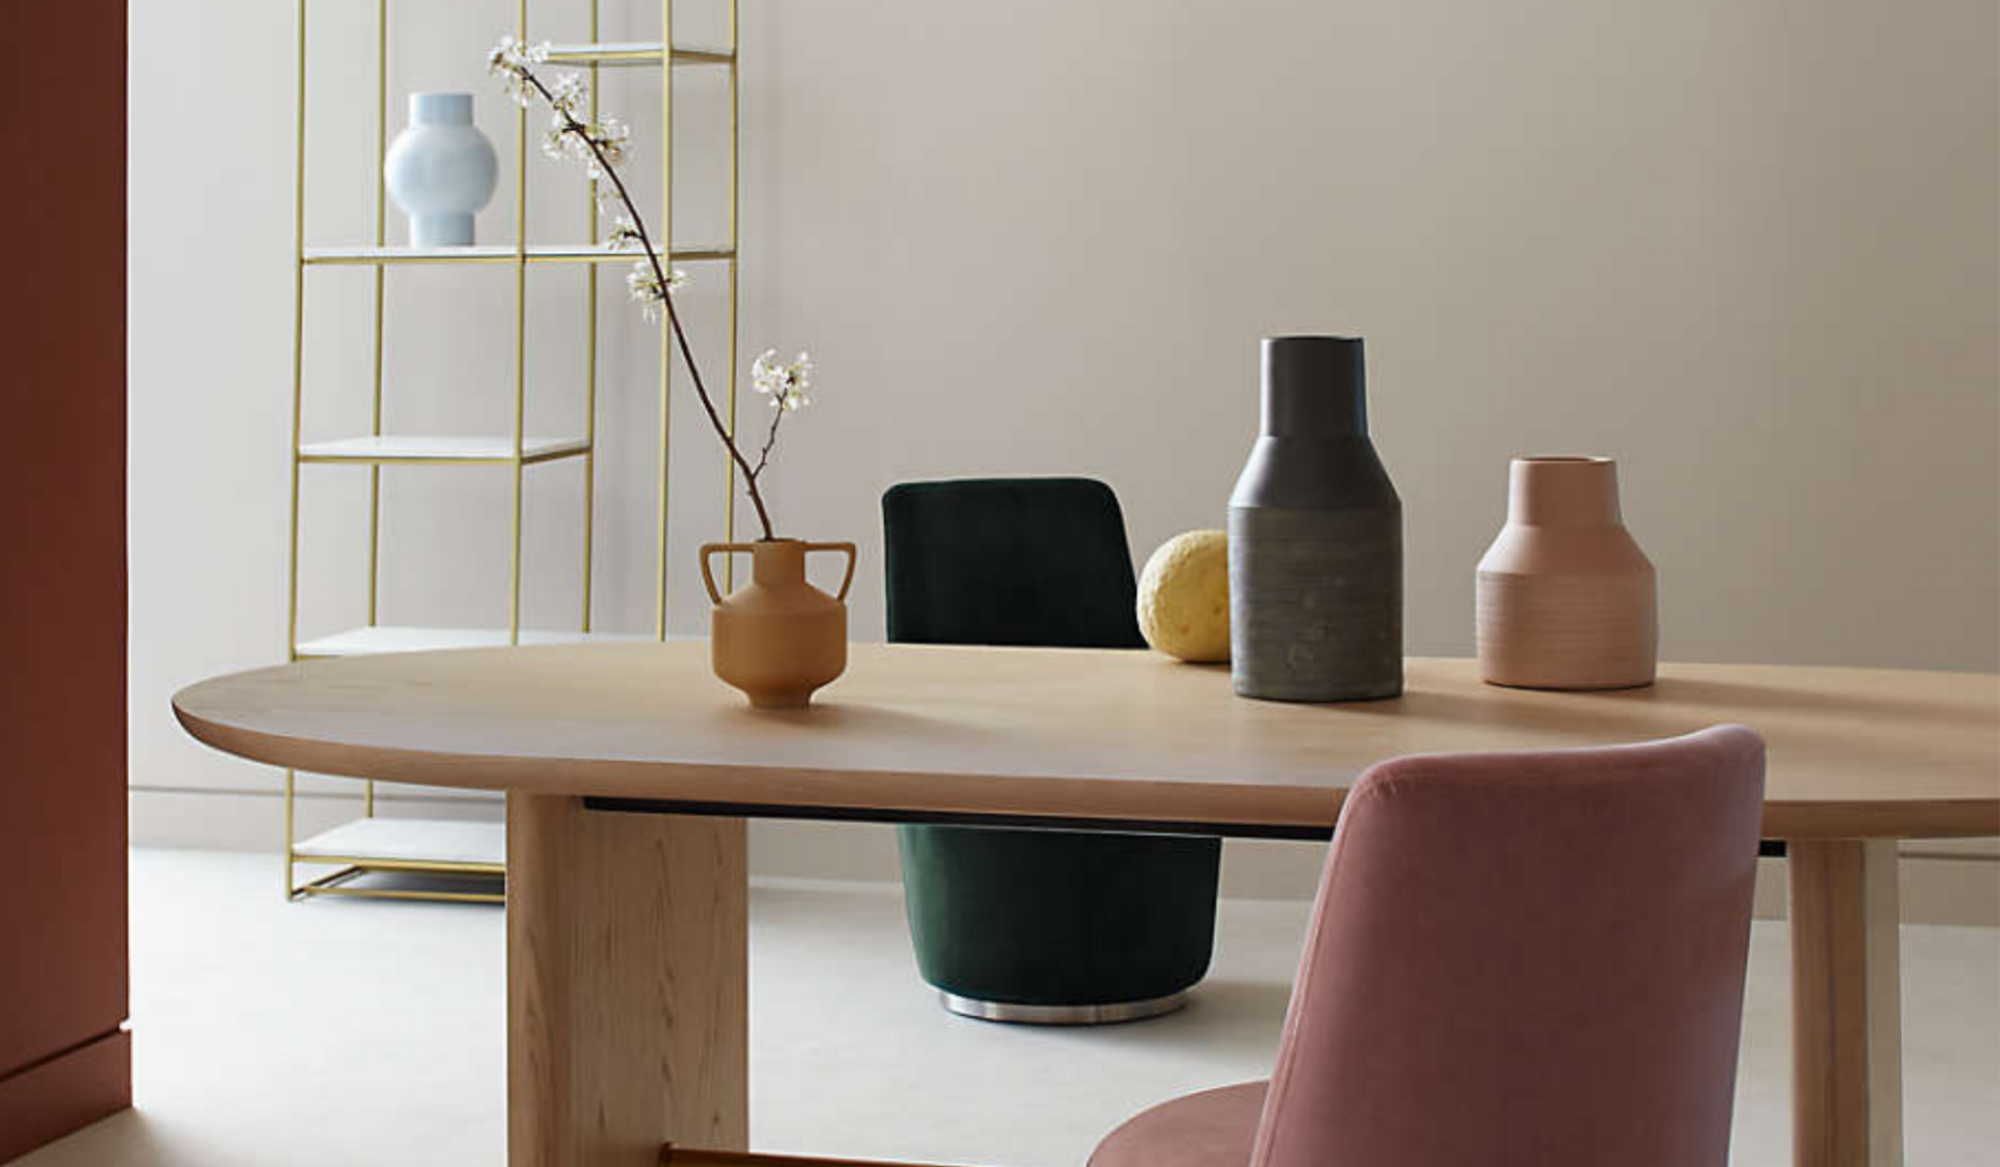 A table, colorful chairs and vases, and a shelf